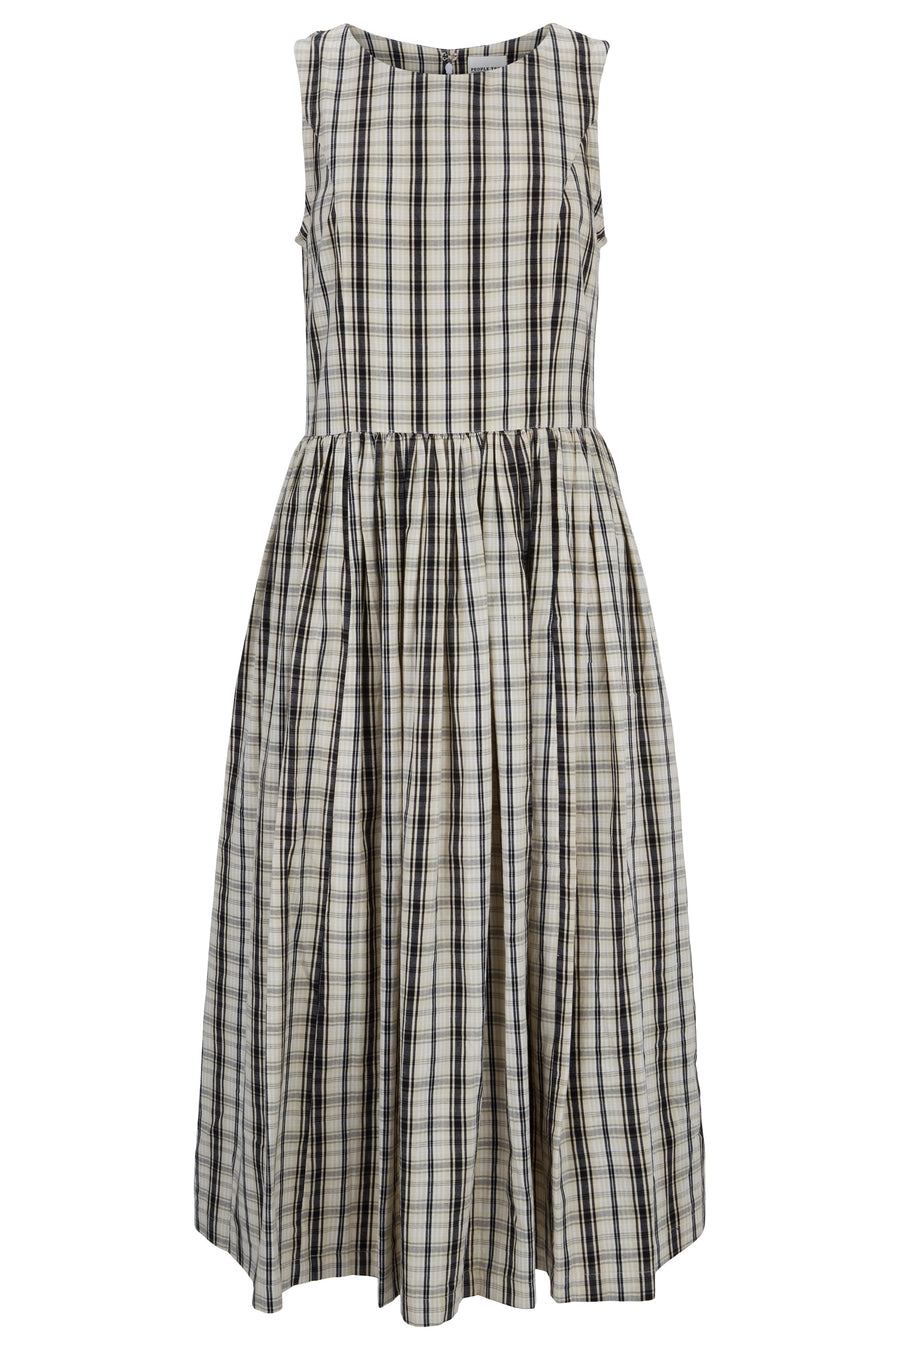 People Tree Fair Trade, Ethical & Sustainable Malin Checked Dress in Black check 100% Organic Cotton